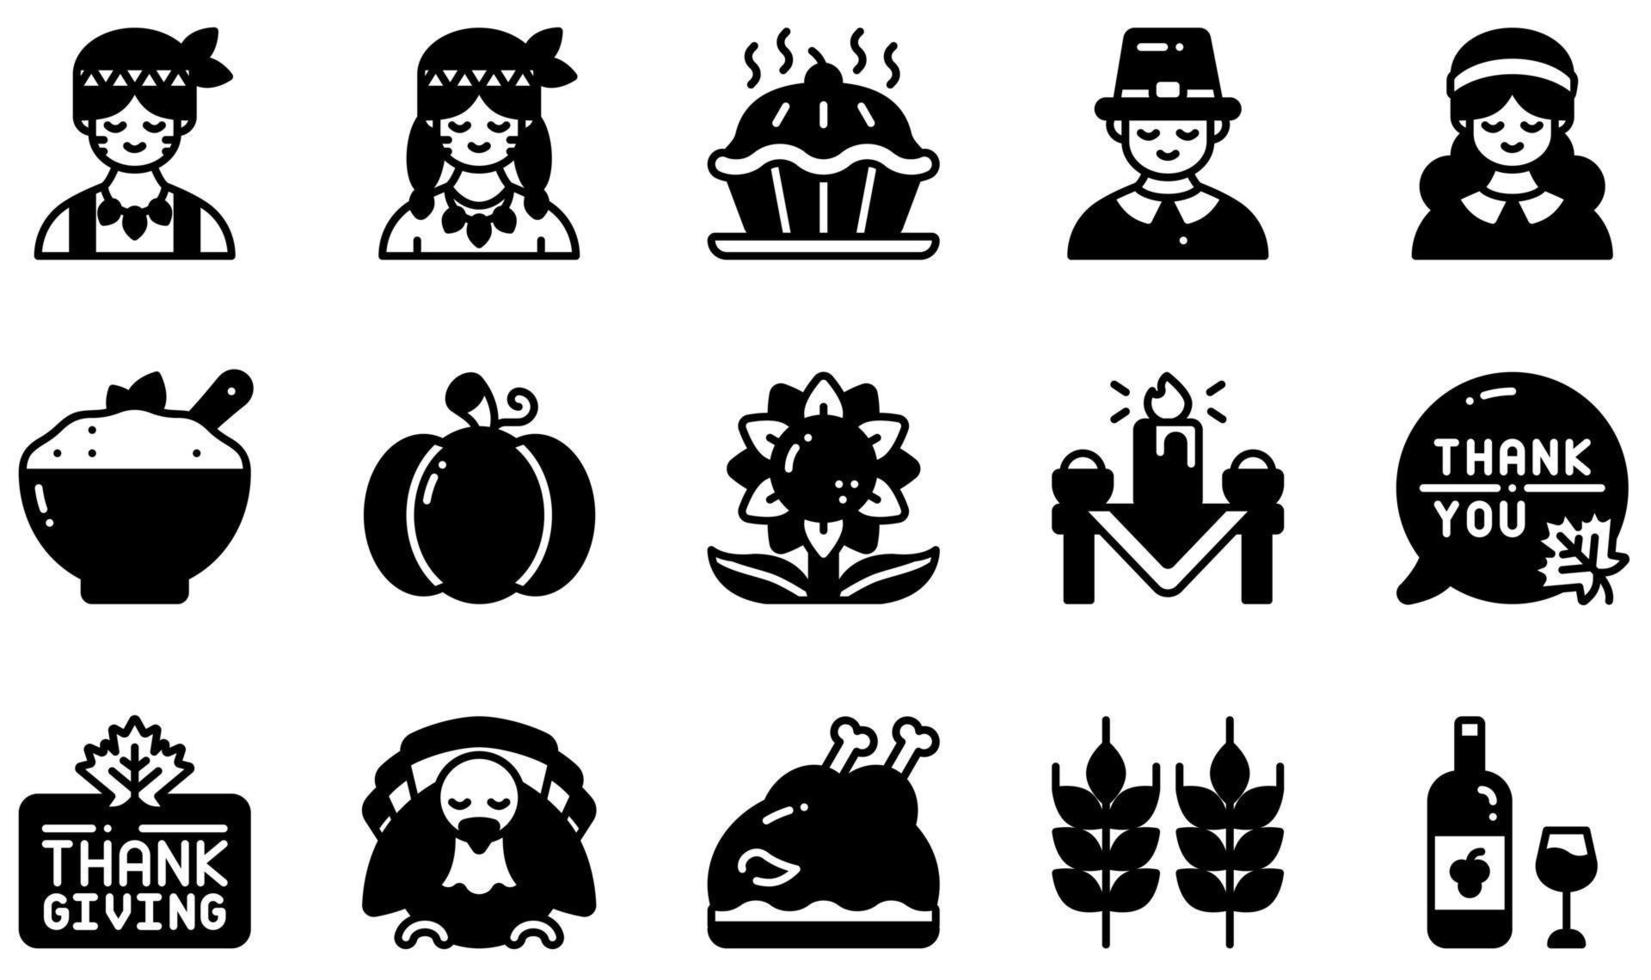 Set of Vector Icons Related to Thanksgiving . Contains such Icons as Pie, Pilgrim, Native American, Pumpkin, Thanksgiving, Turkey and more.